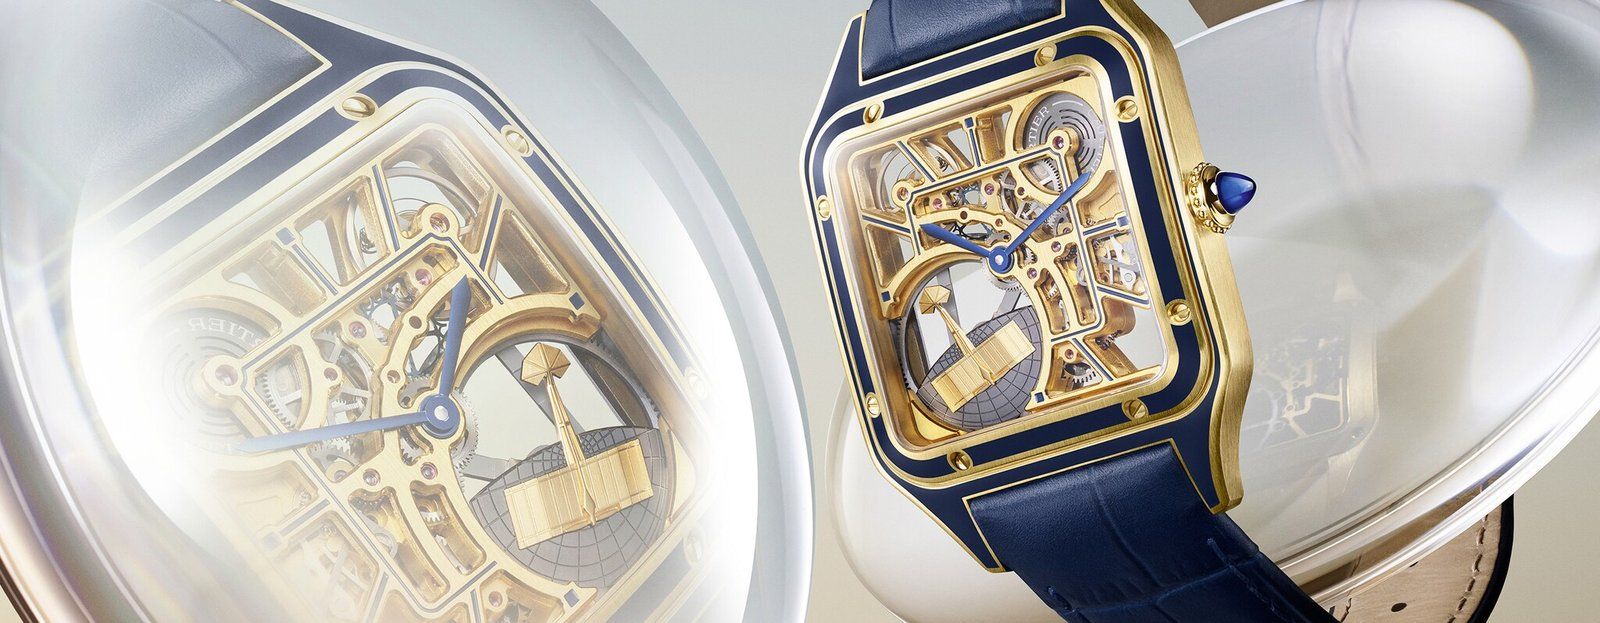 The limited edition lacquered yellow-gold Santos-Dumont